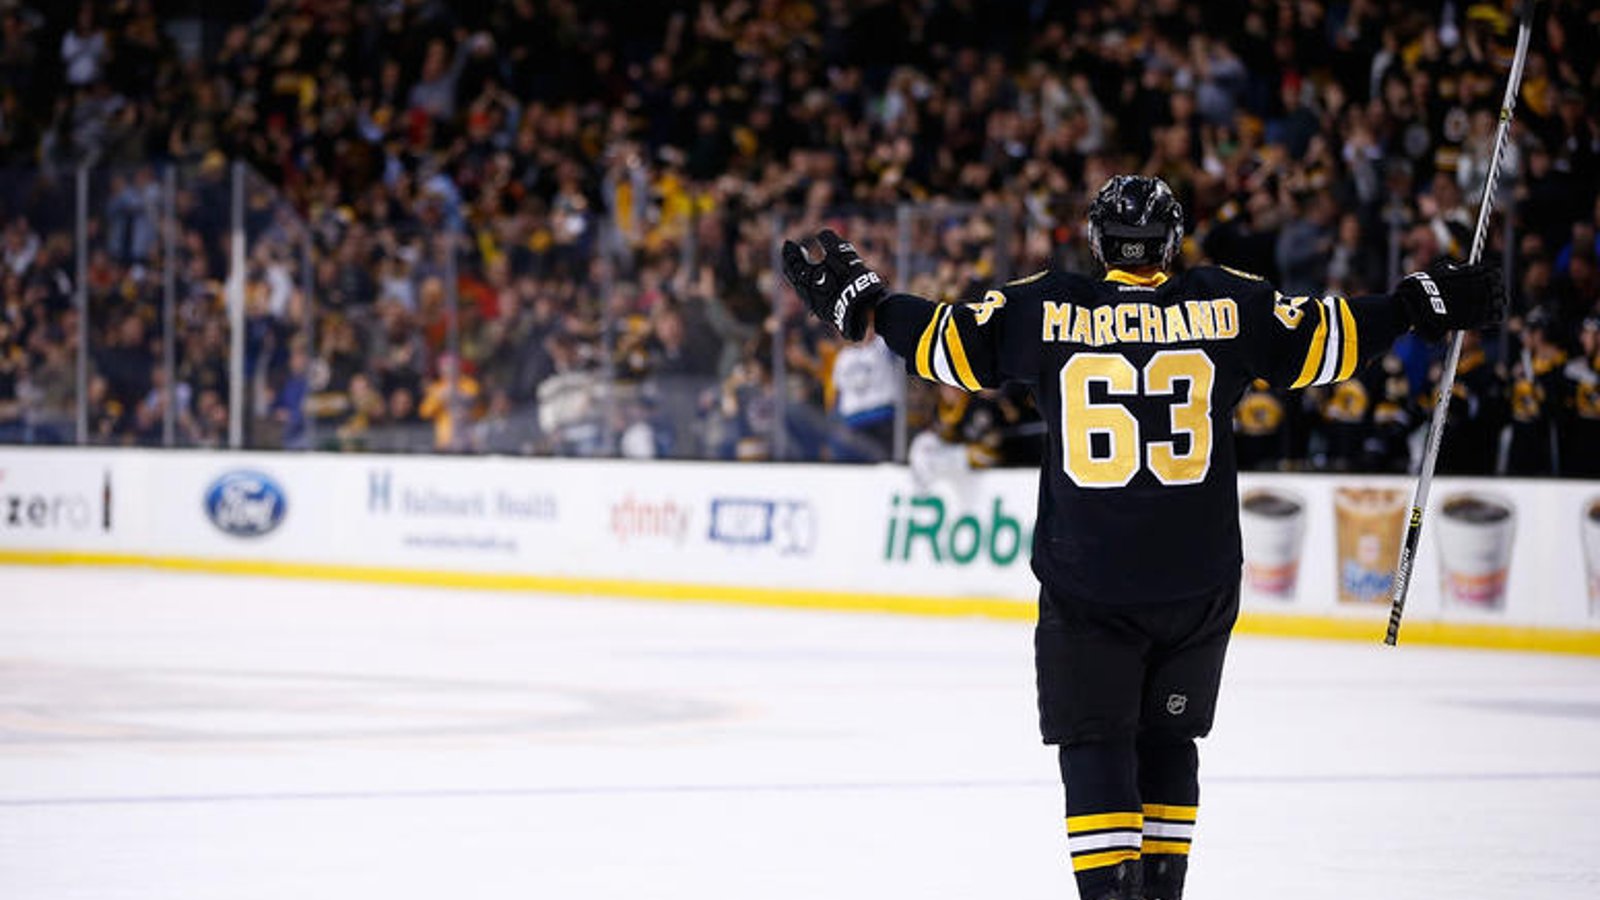 New service offered by the Boston Bruins